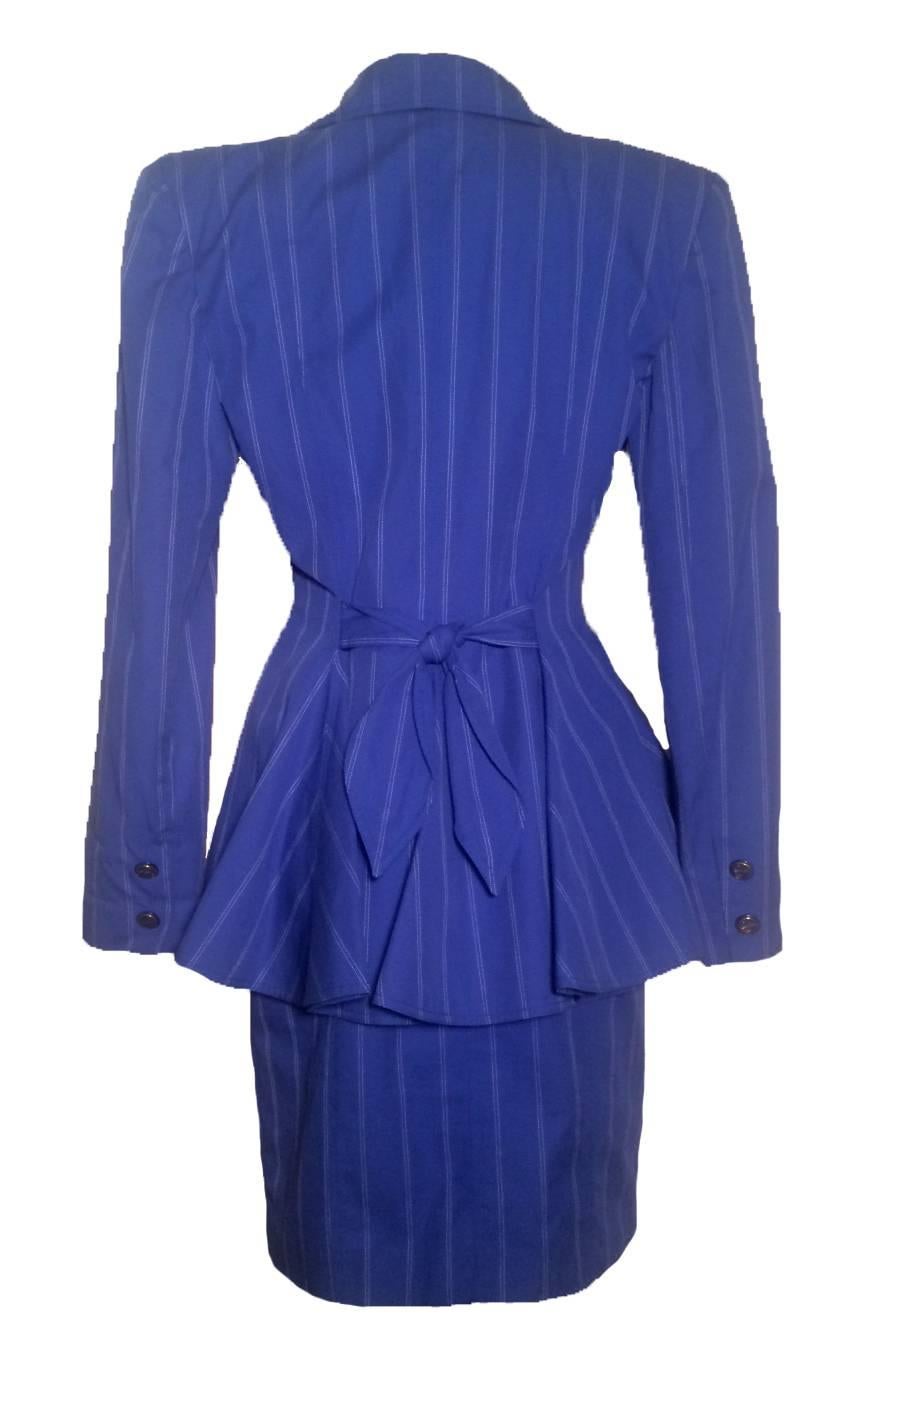 Vintage 80’s Patrick Kelly Paris blue suit with white pinstripe detailing. Anchor motif buttons at skirt waist, padding at shoulders. Skirt has zip and button front and two side pockets. 

95% cotton, 5% polyester. Both pieces are fully lined in